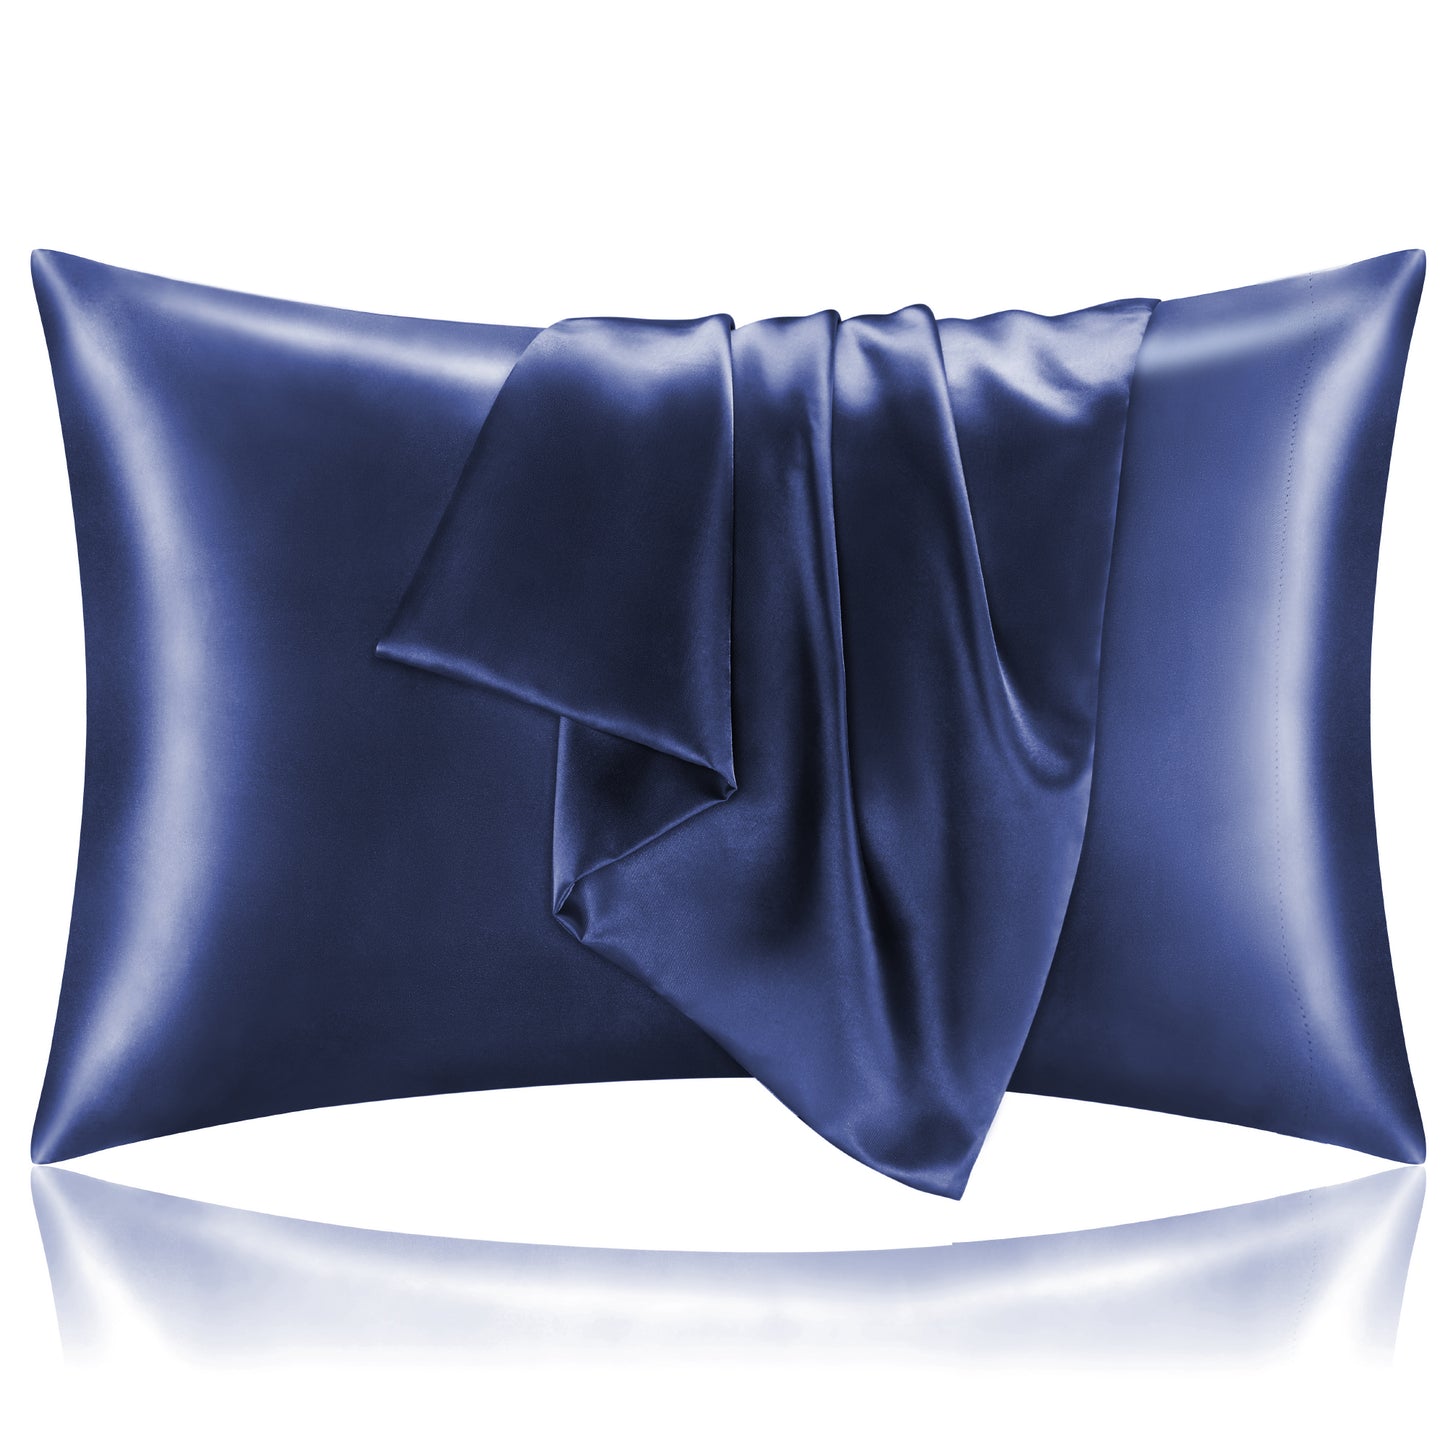 Satin Silk Pillowcase for Hair and Skin, Pillow Cases Set of 2 Pack, Super Soft Silky Pillow Case with Envelope Closure